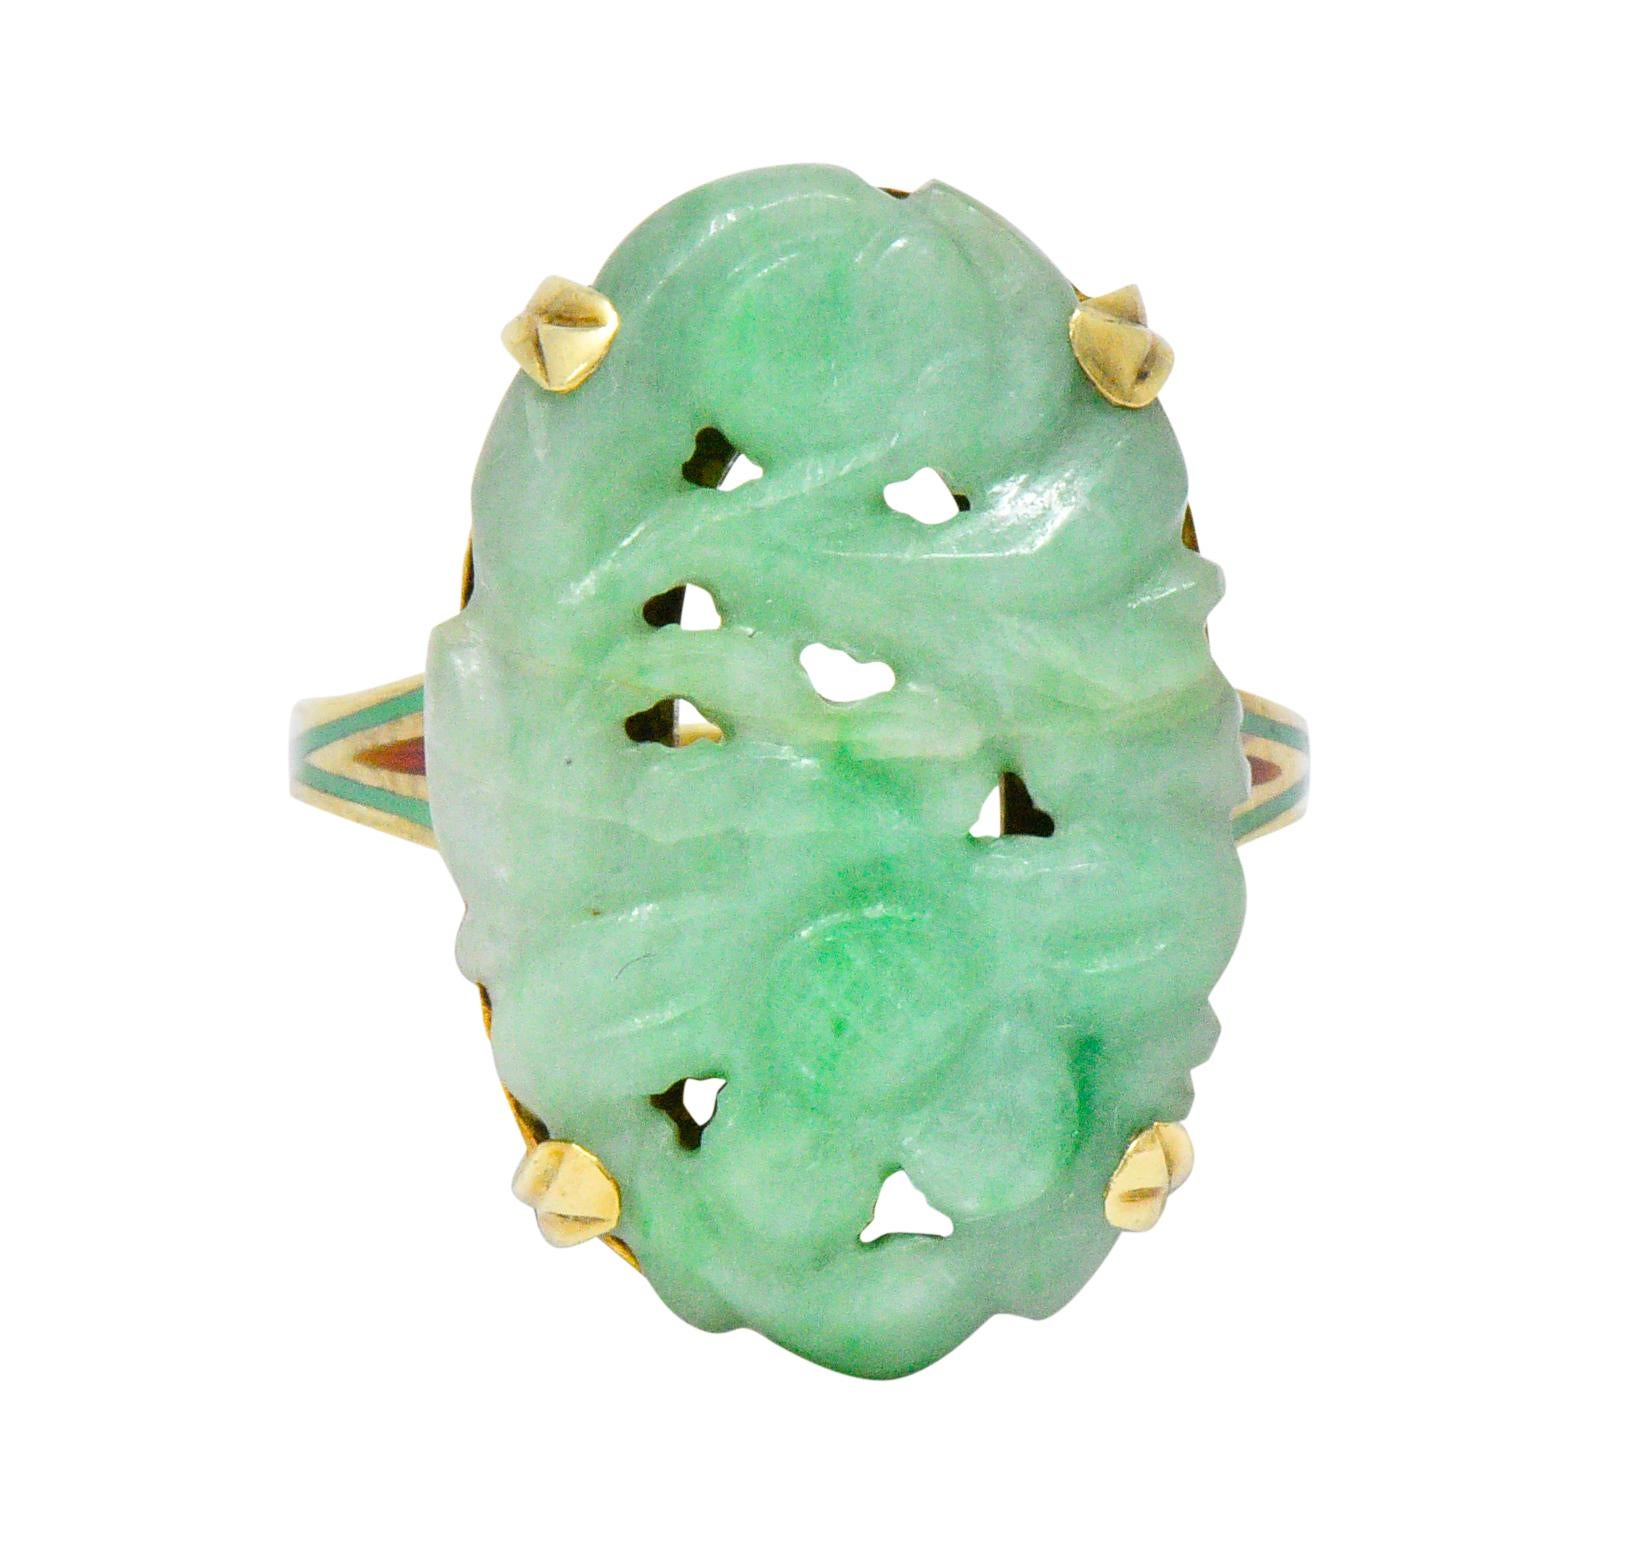 Centering an oval carved jade, measuring approximately 22.5 x 15.2 mm, light mottled green

Carved with a floral and foliate motif

Shoulders exhibit inlaid green and deep orange enamel in a chevron motif

With maker's mark and stamped 14K

Ring